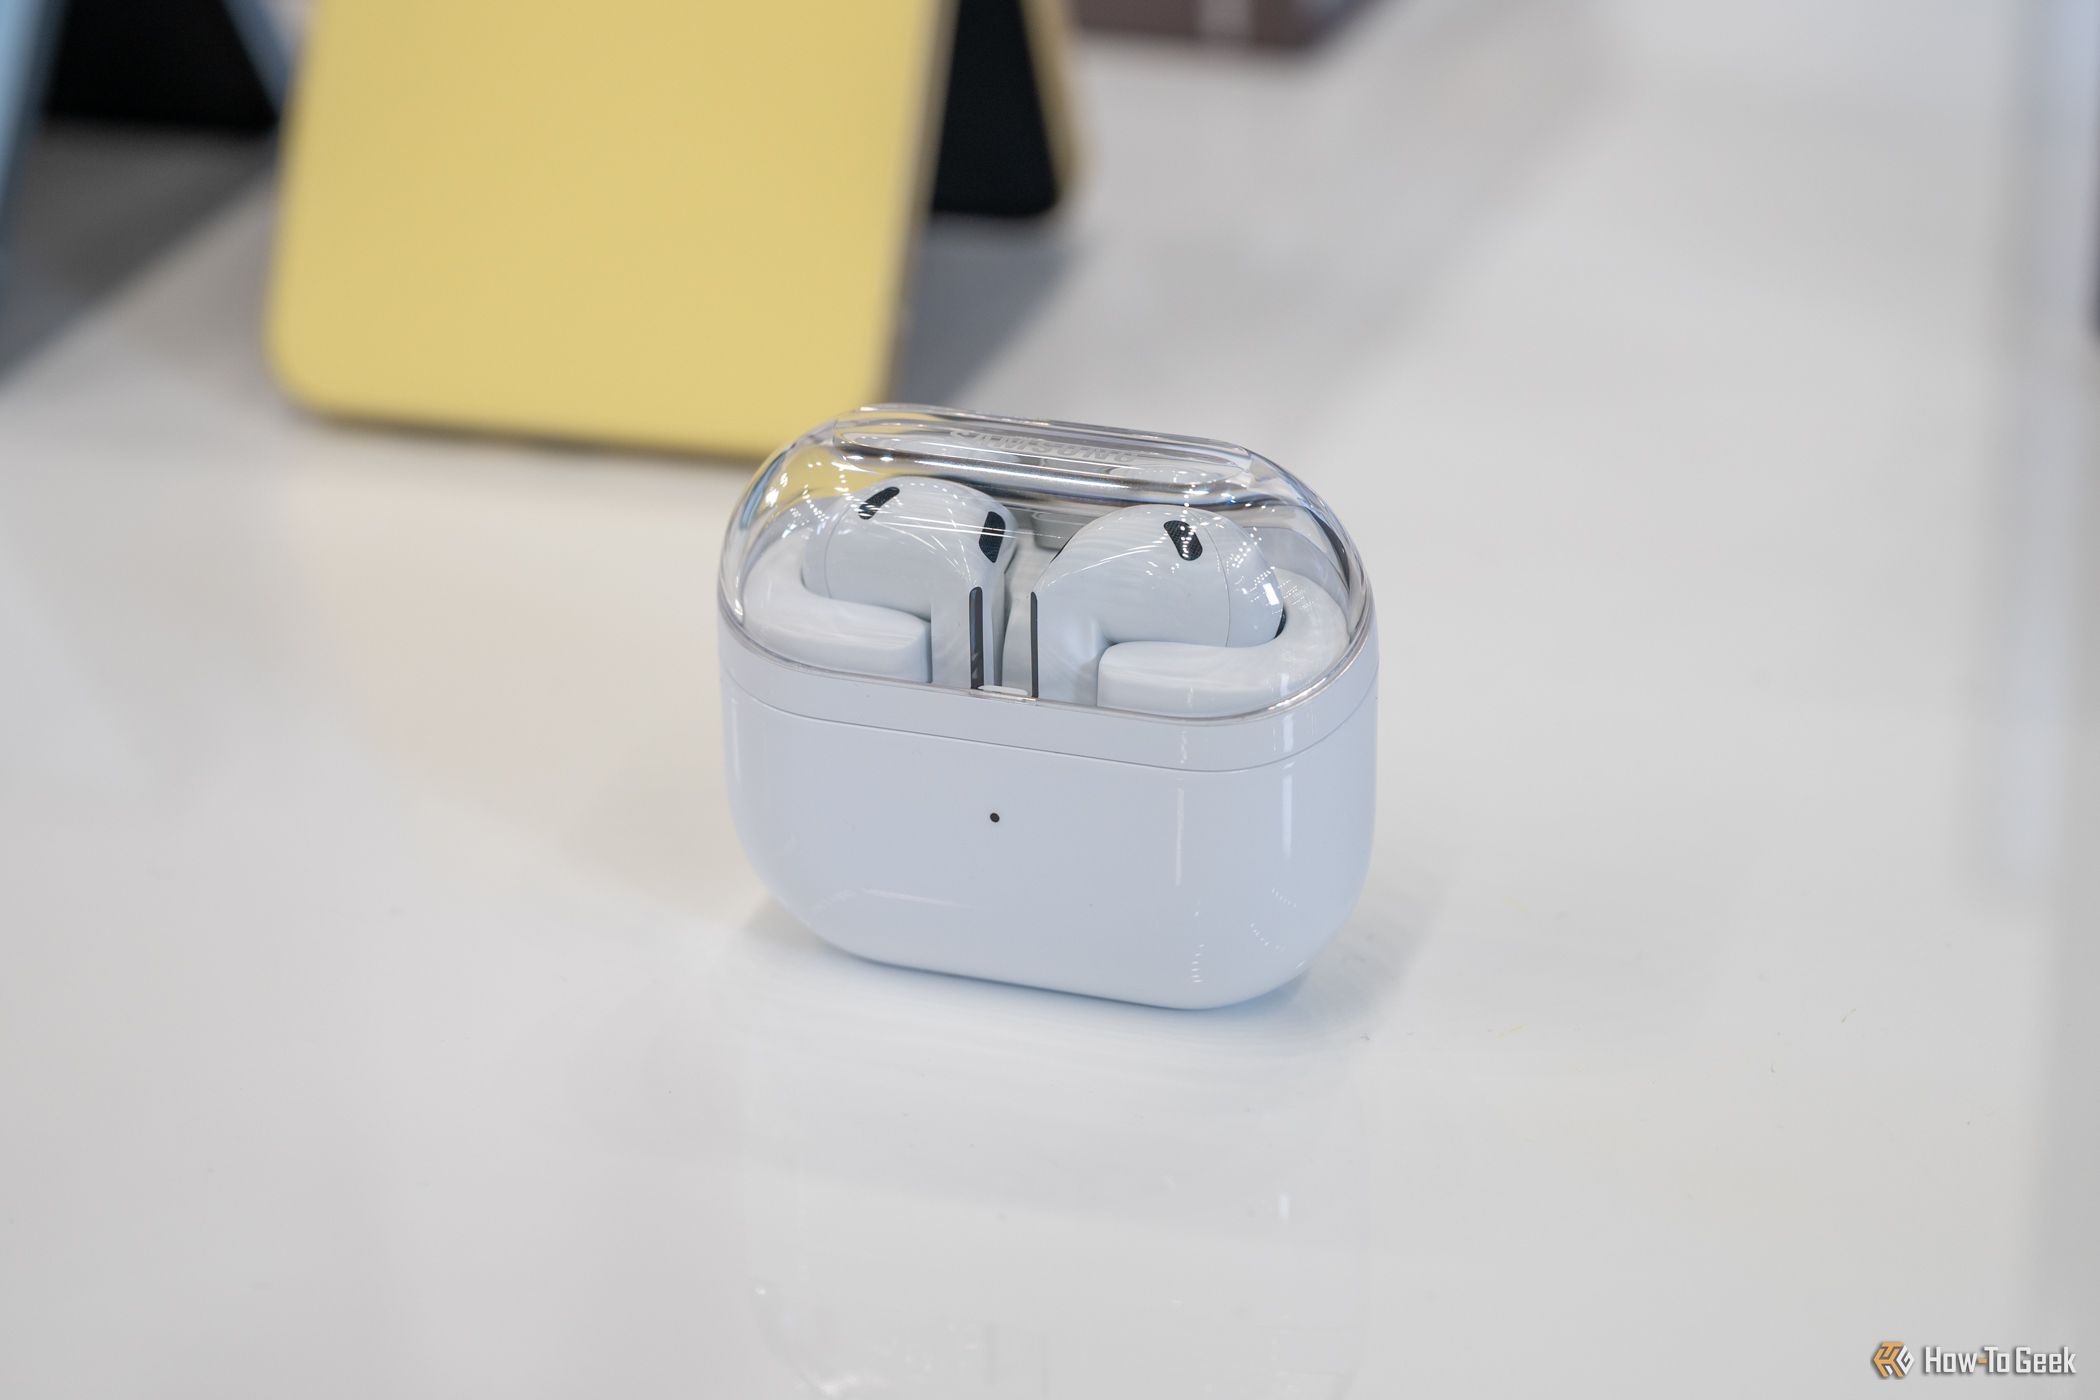 Samsung Galaxy Buds 3 sitting on a table inside its charging case